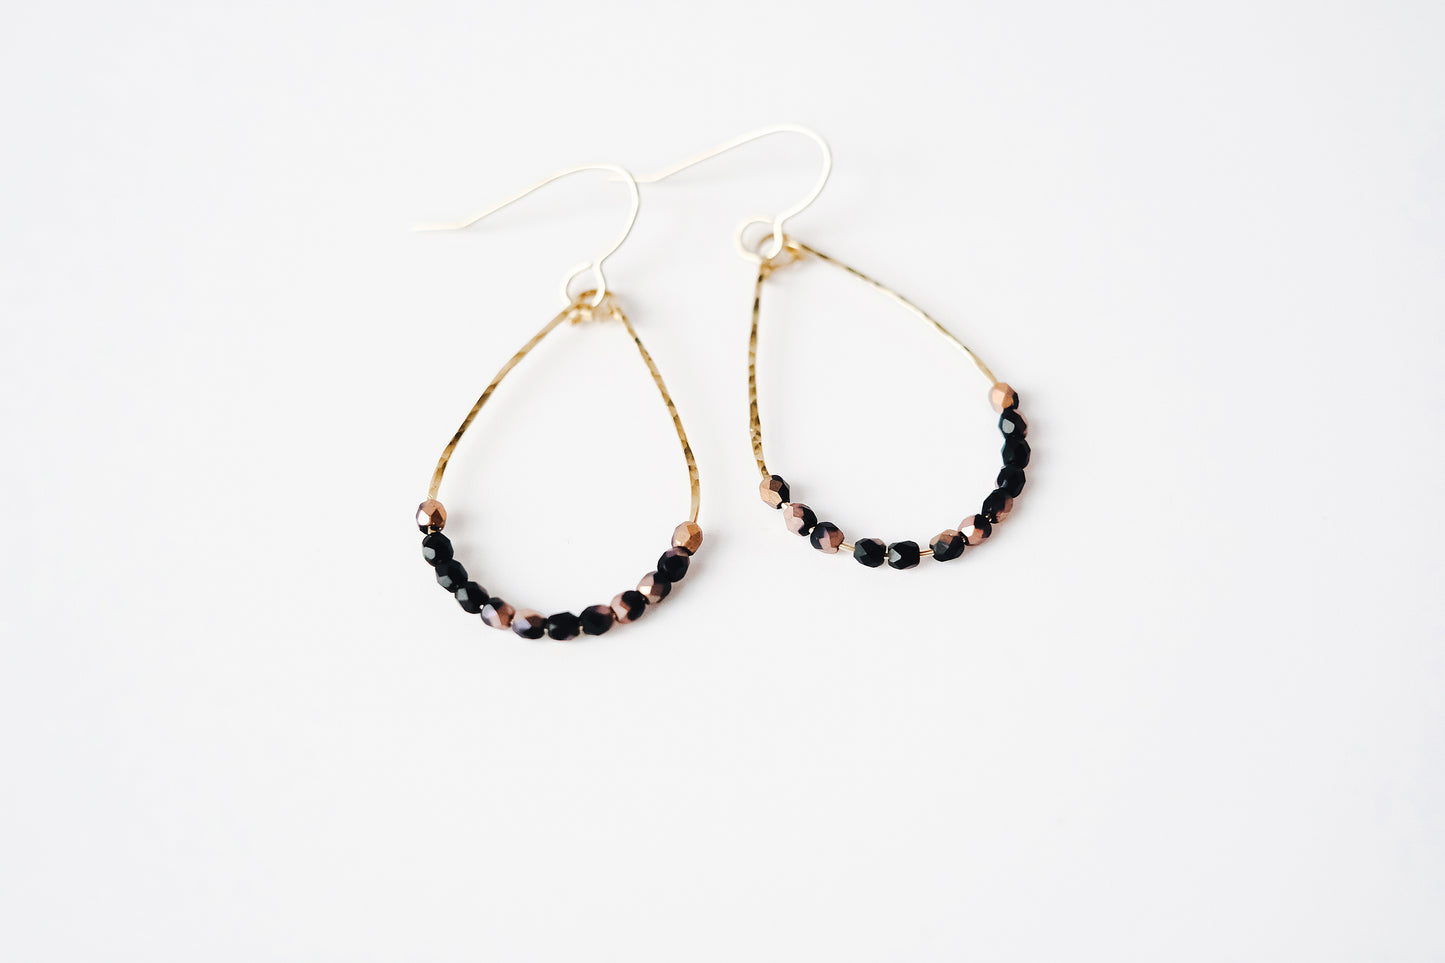 Gold wire teardrop shaped dangle earrings, strung with 12 black and pink speckled faceted glass beads that rest at the bottom of the teardrop shape, laying on a white surface.